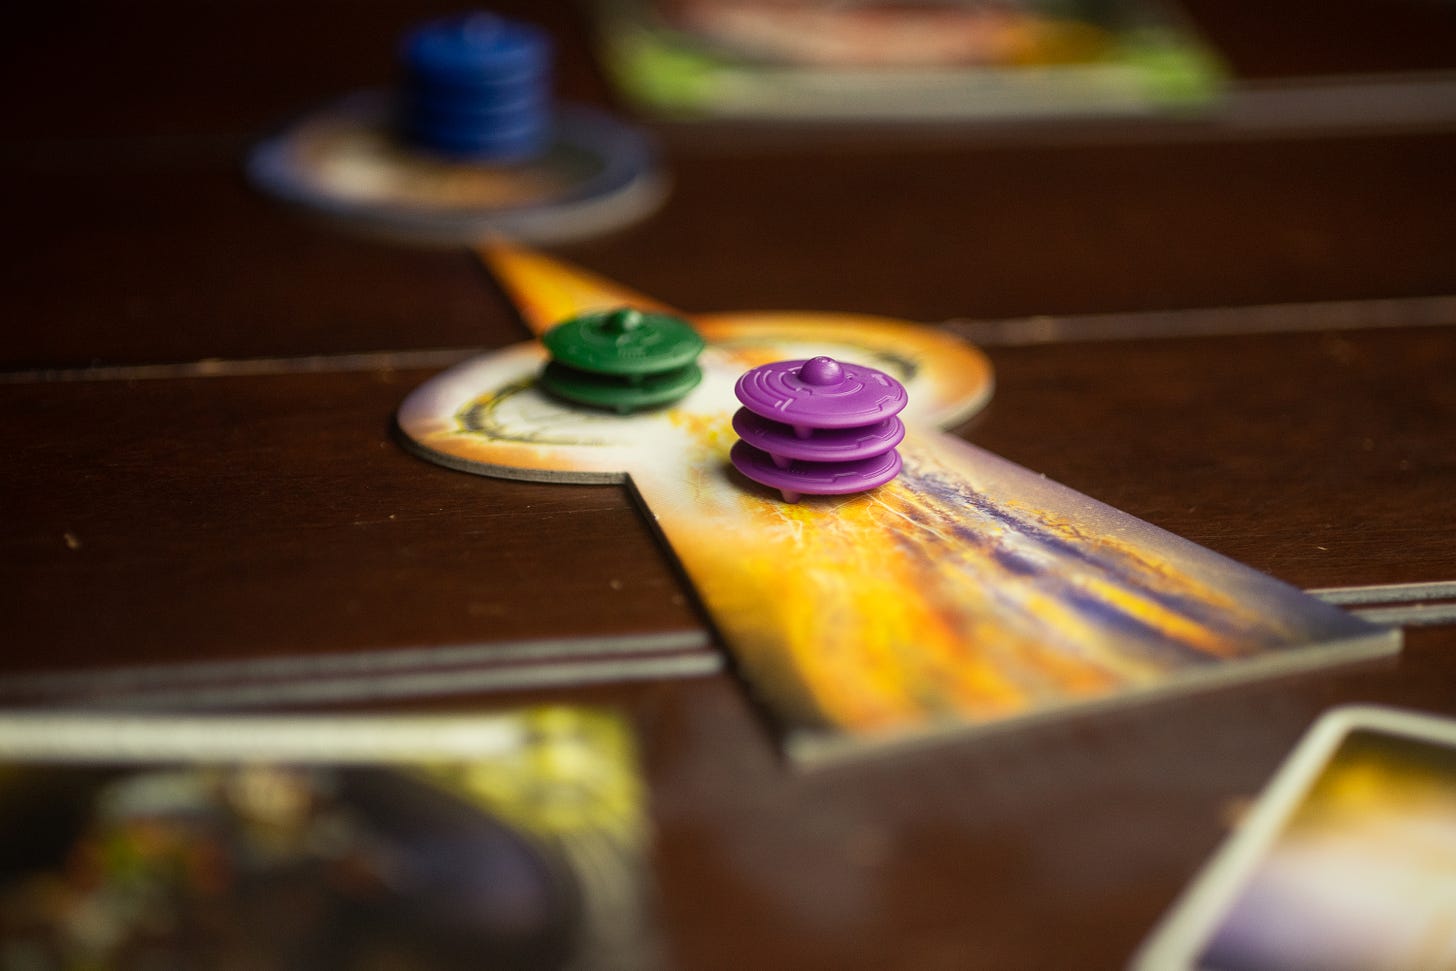 Ships from the board game Cosmic Encounter placed on a piece indicating a player's planet being attacked. There are three purple pieces and two green pieces. In the background and out of focus, there are four blue ships defending the attacked planet.